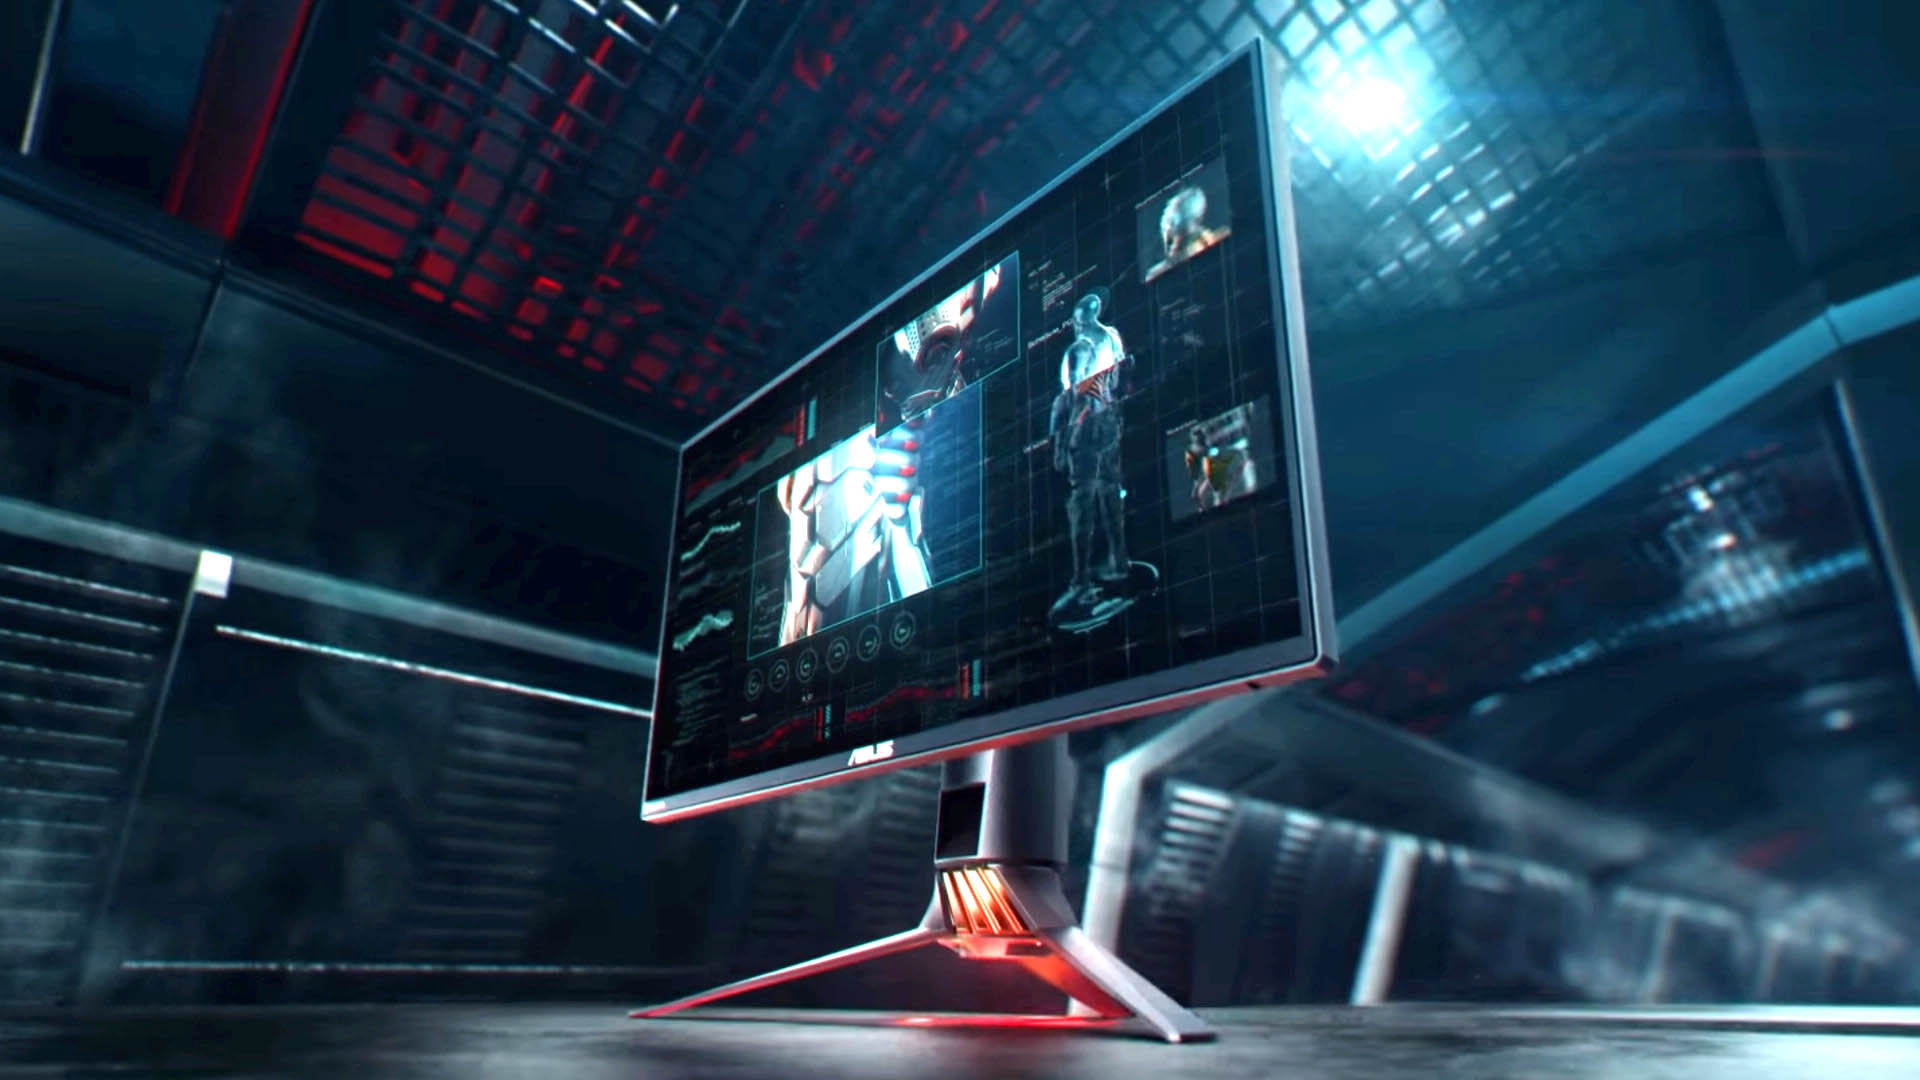 We Will Soon Get 480hz Gaming Monitors With Better Blacks But Oled Is Still Absent